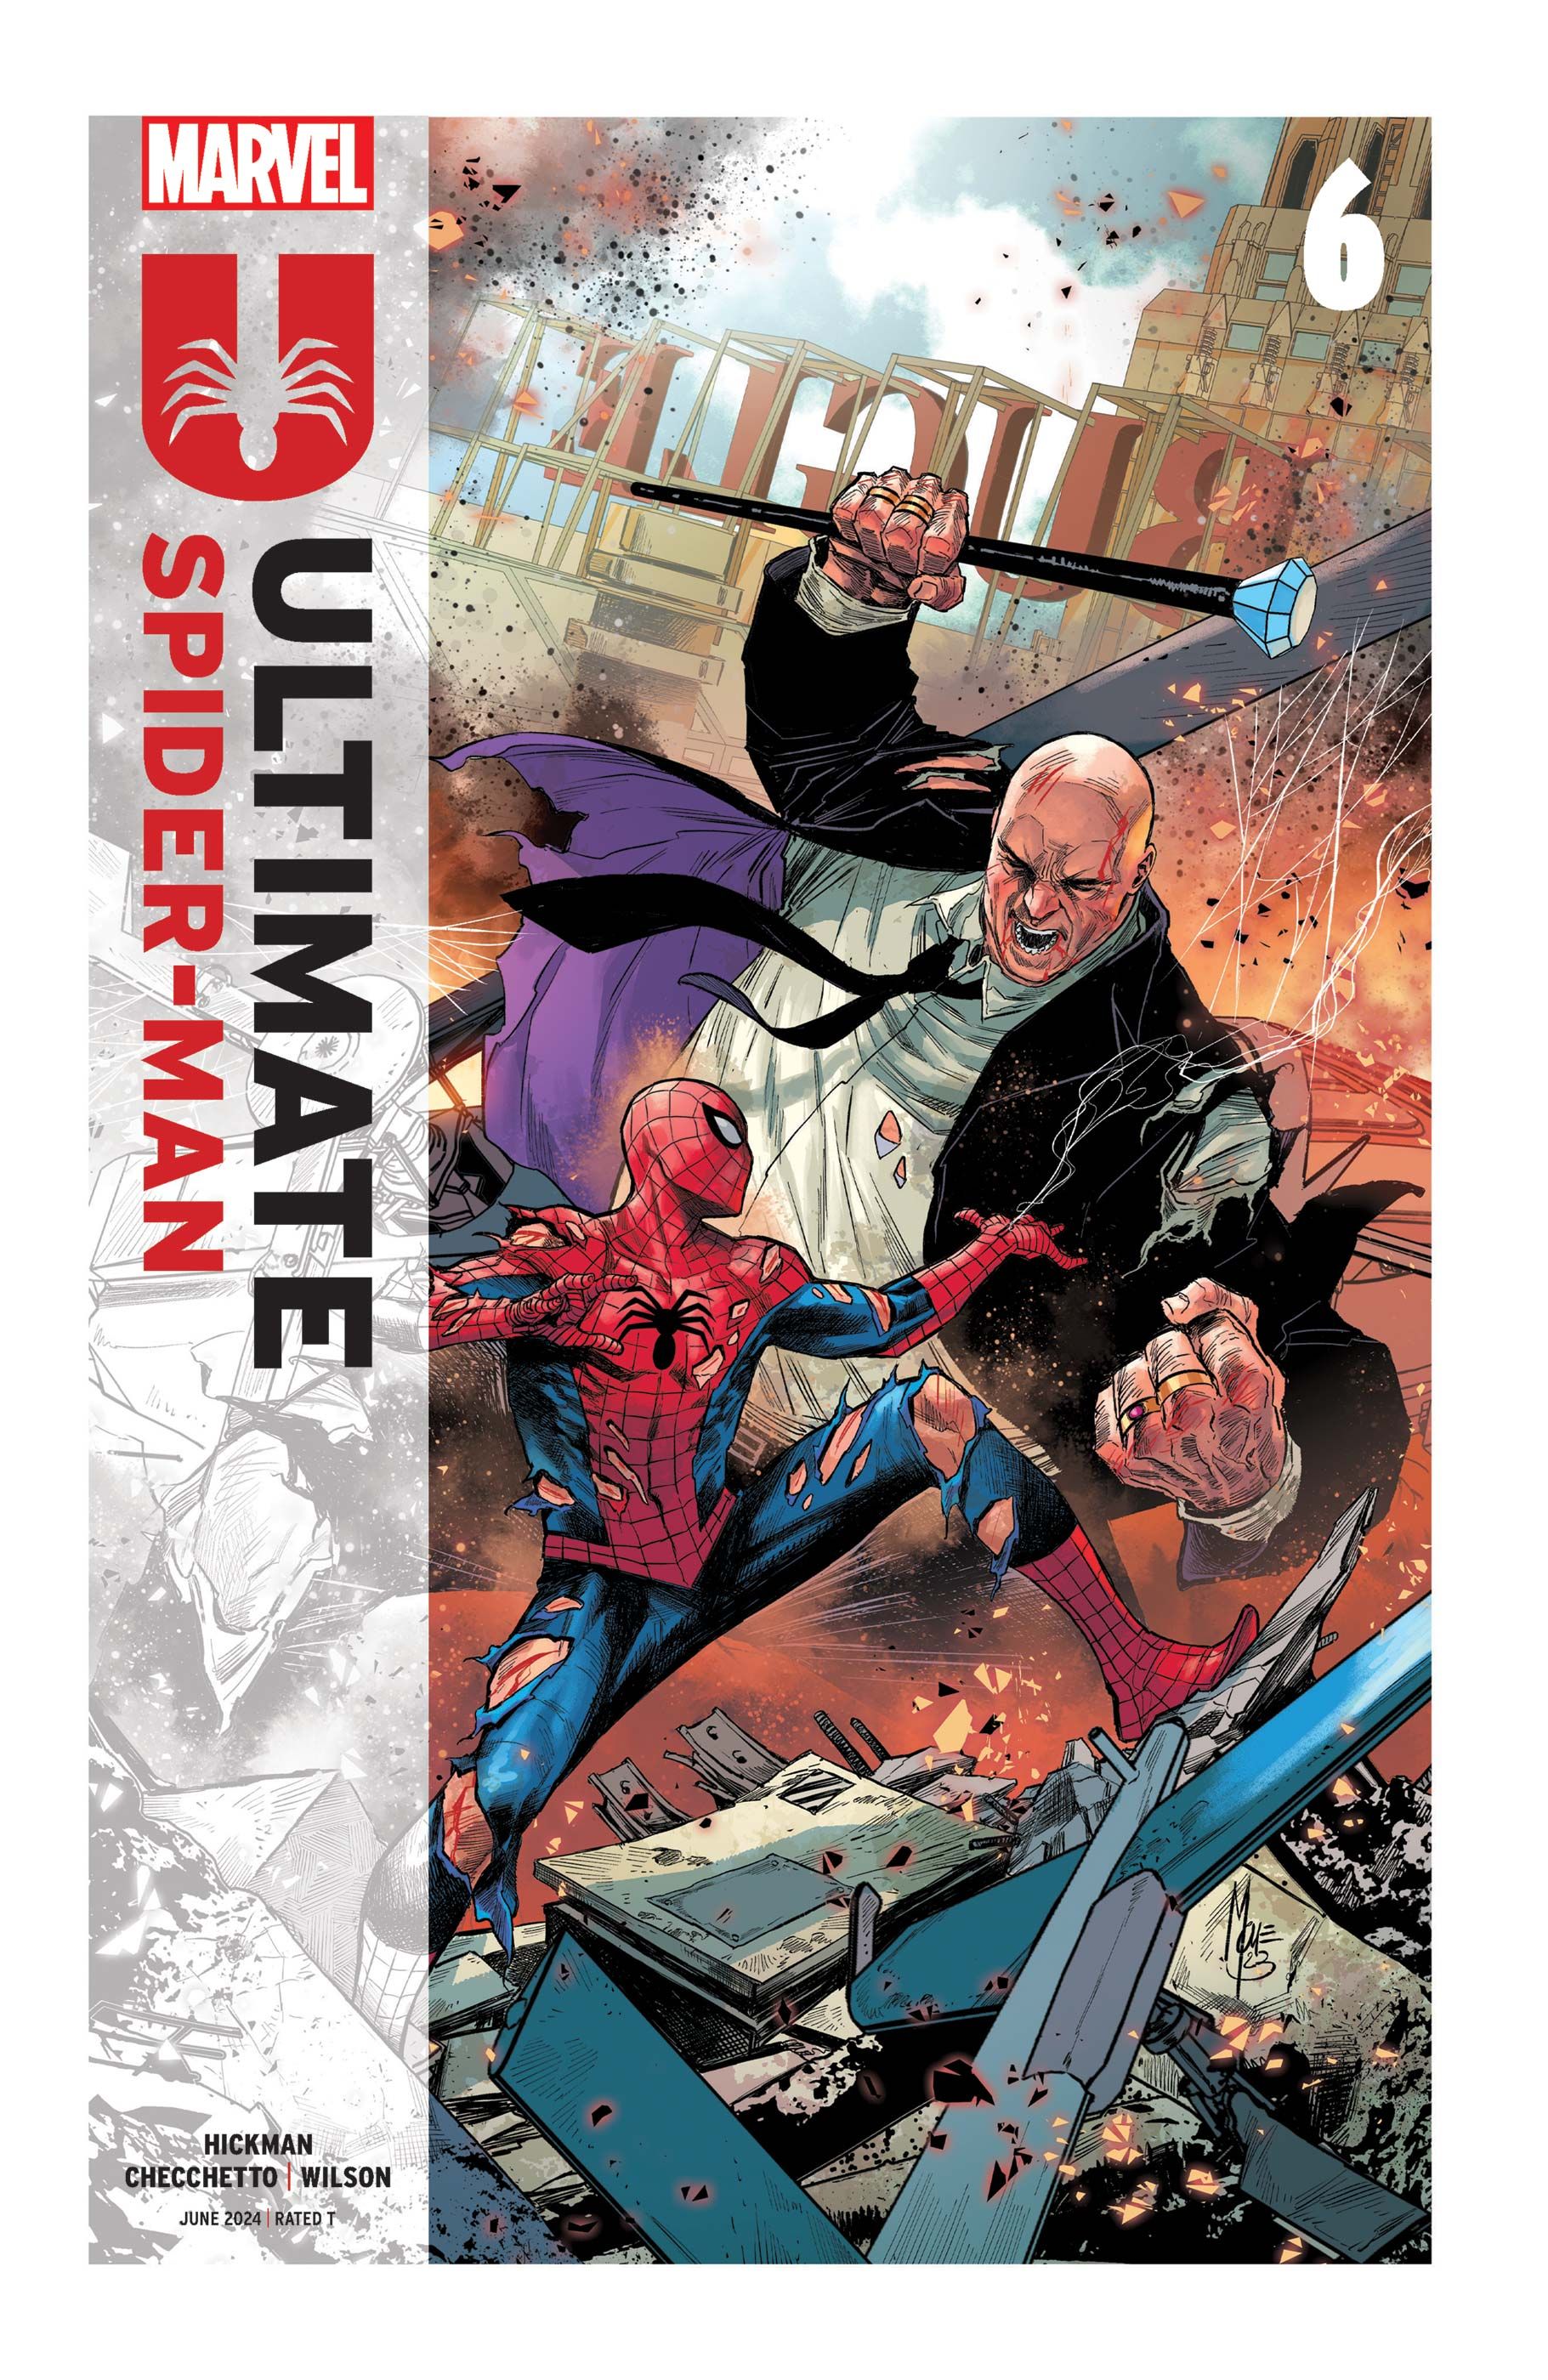 Ultimate Spider-Man #6 cover, featuring the Webslinger fighting against Kingpin on a rubble-strewn street.